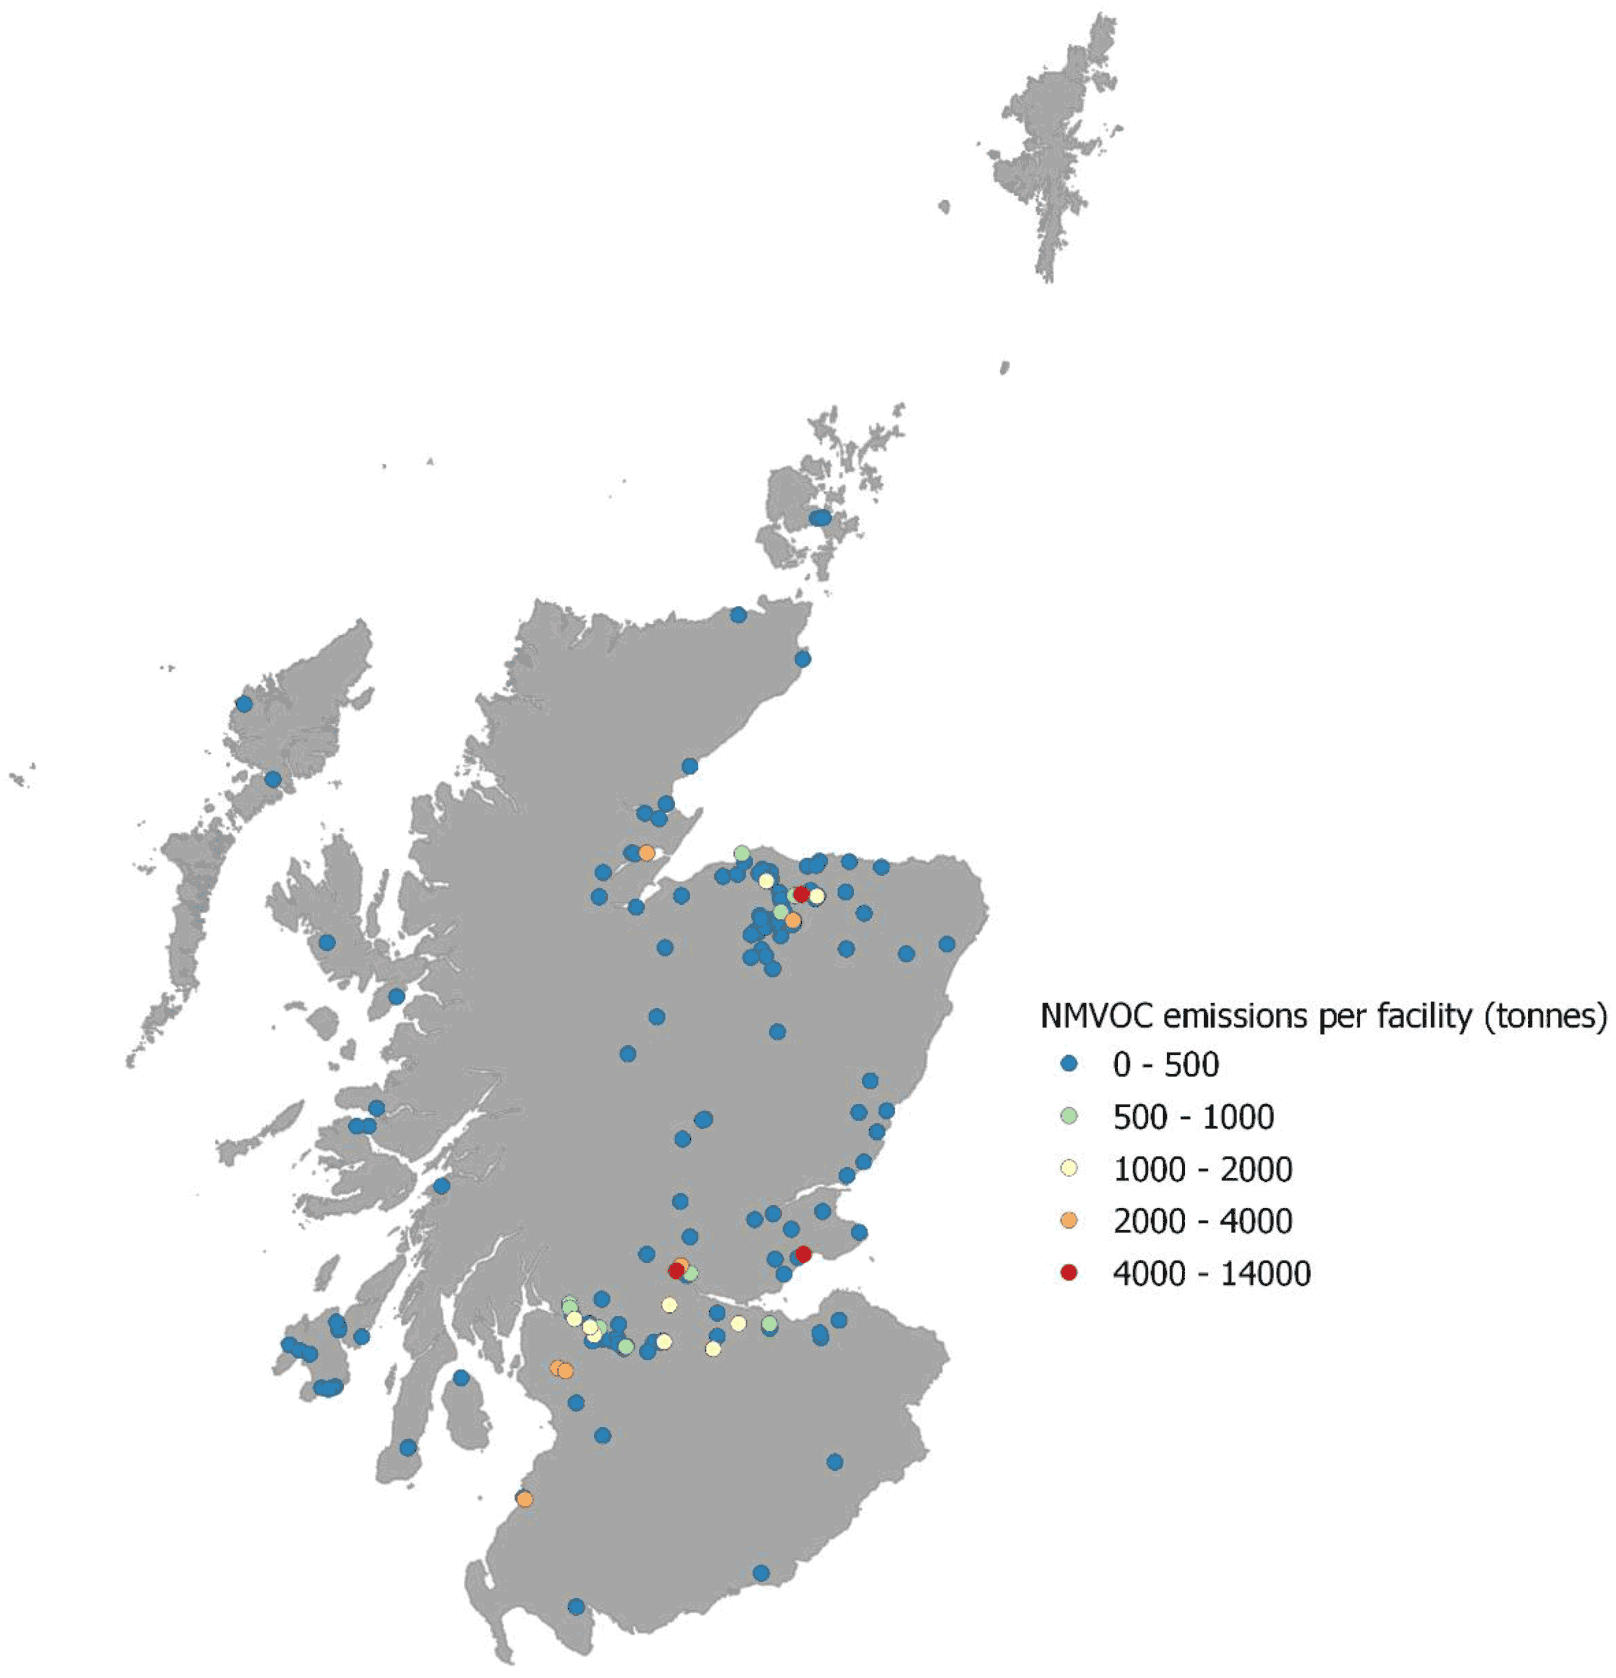 Locations of Scotch whisky production sites in Scotland and their annual NMVOC emissions.